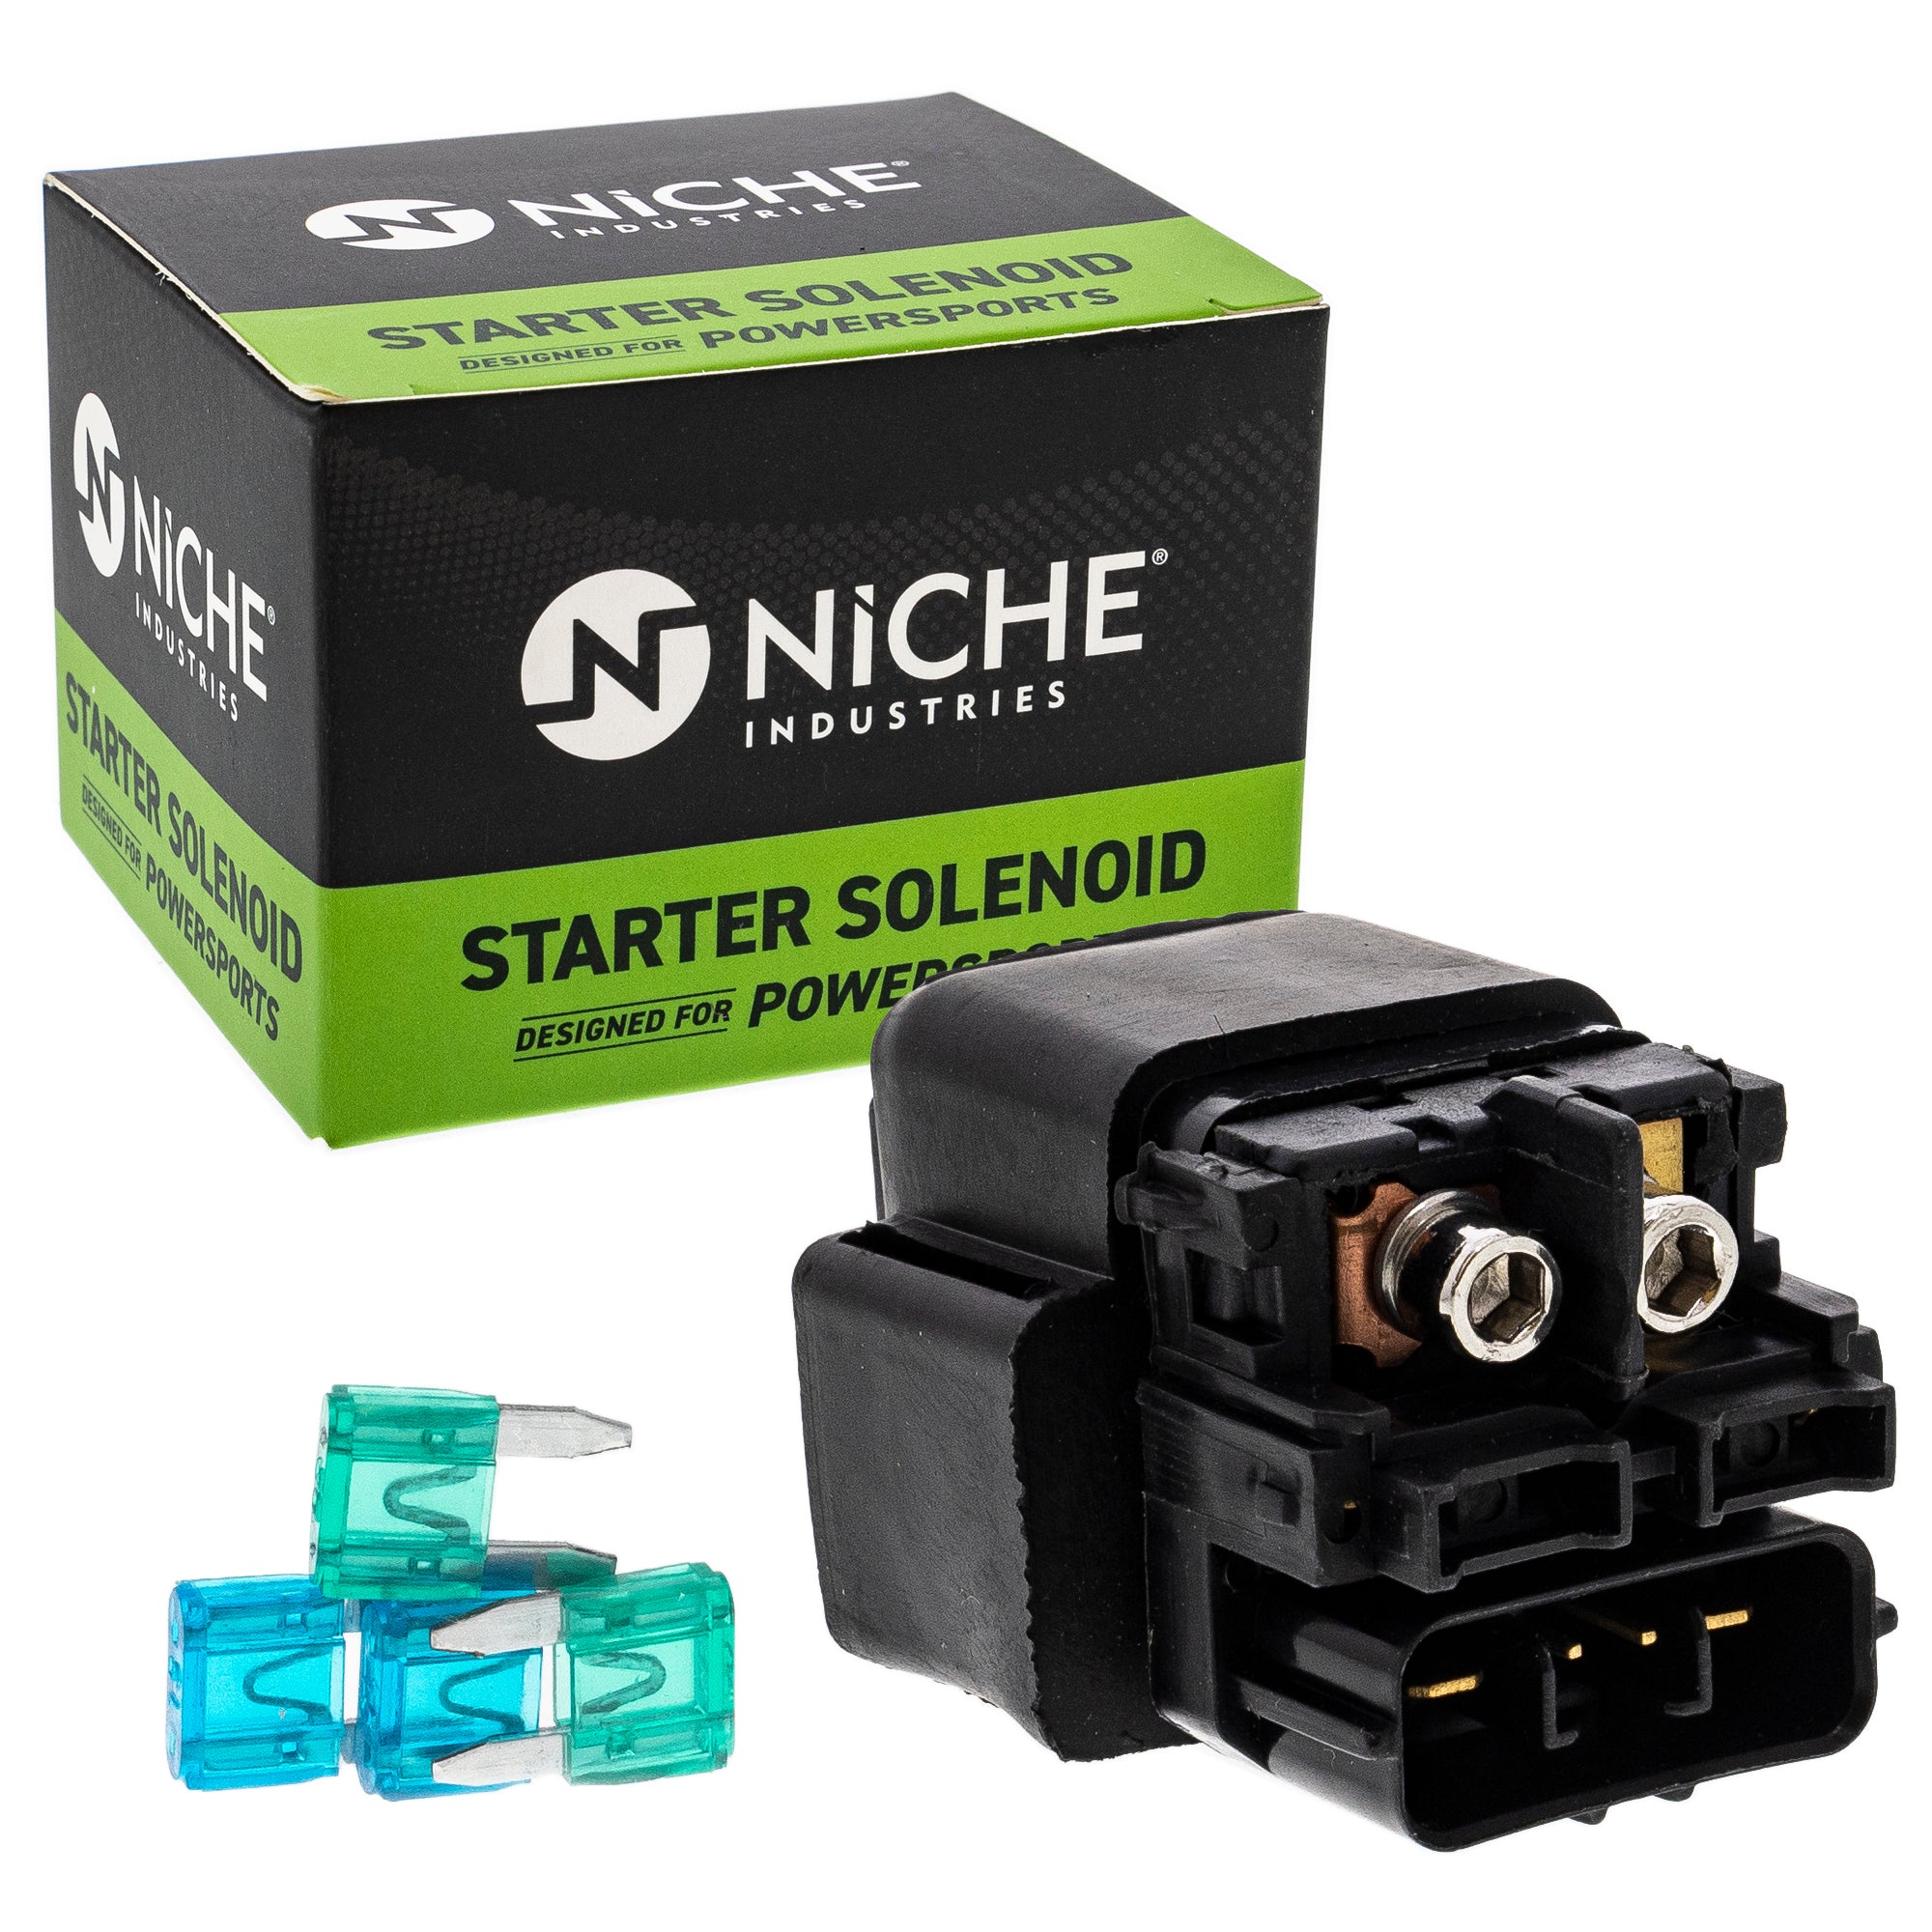 Starter Solenoid Relay Switch for zOTHER Versys Ninja NICHE 519-CSS2337L